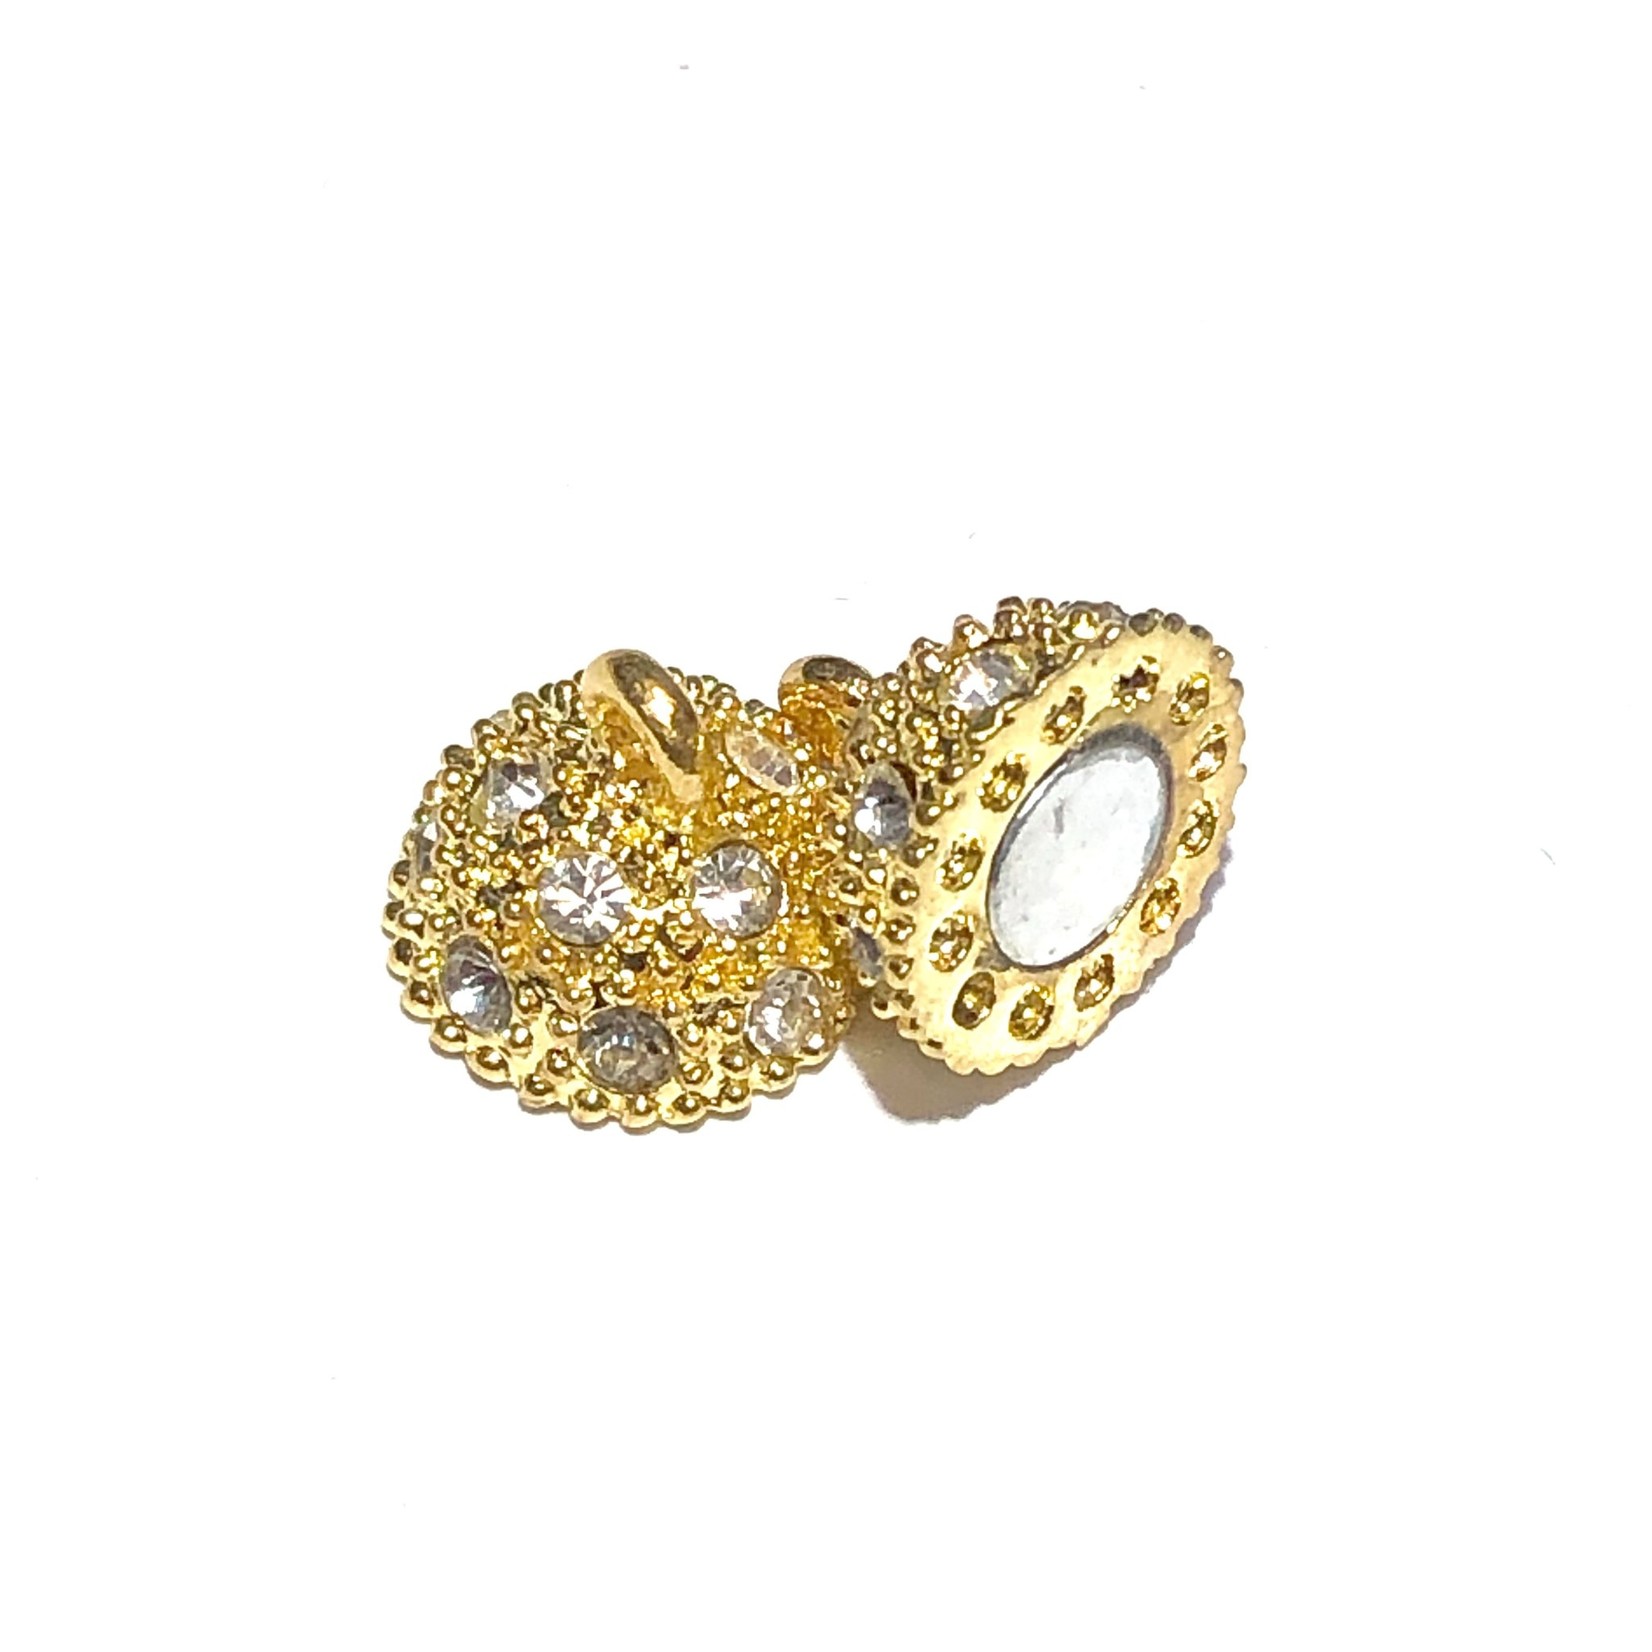 Magnetic CLASP 19x12mm Gold Plated Rhinestone